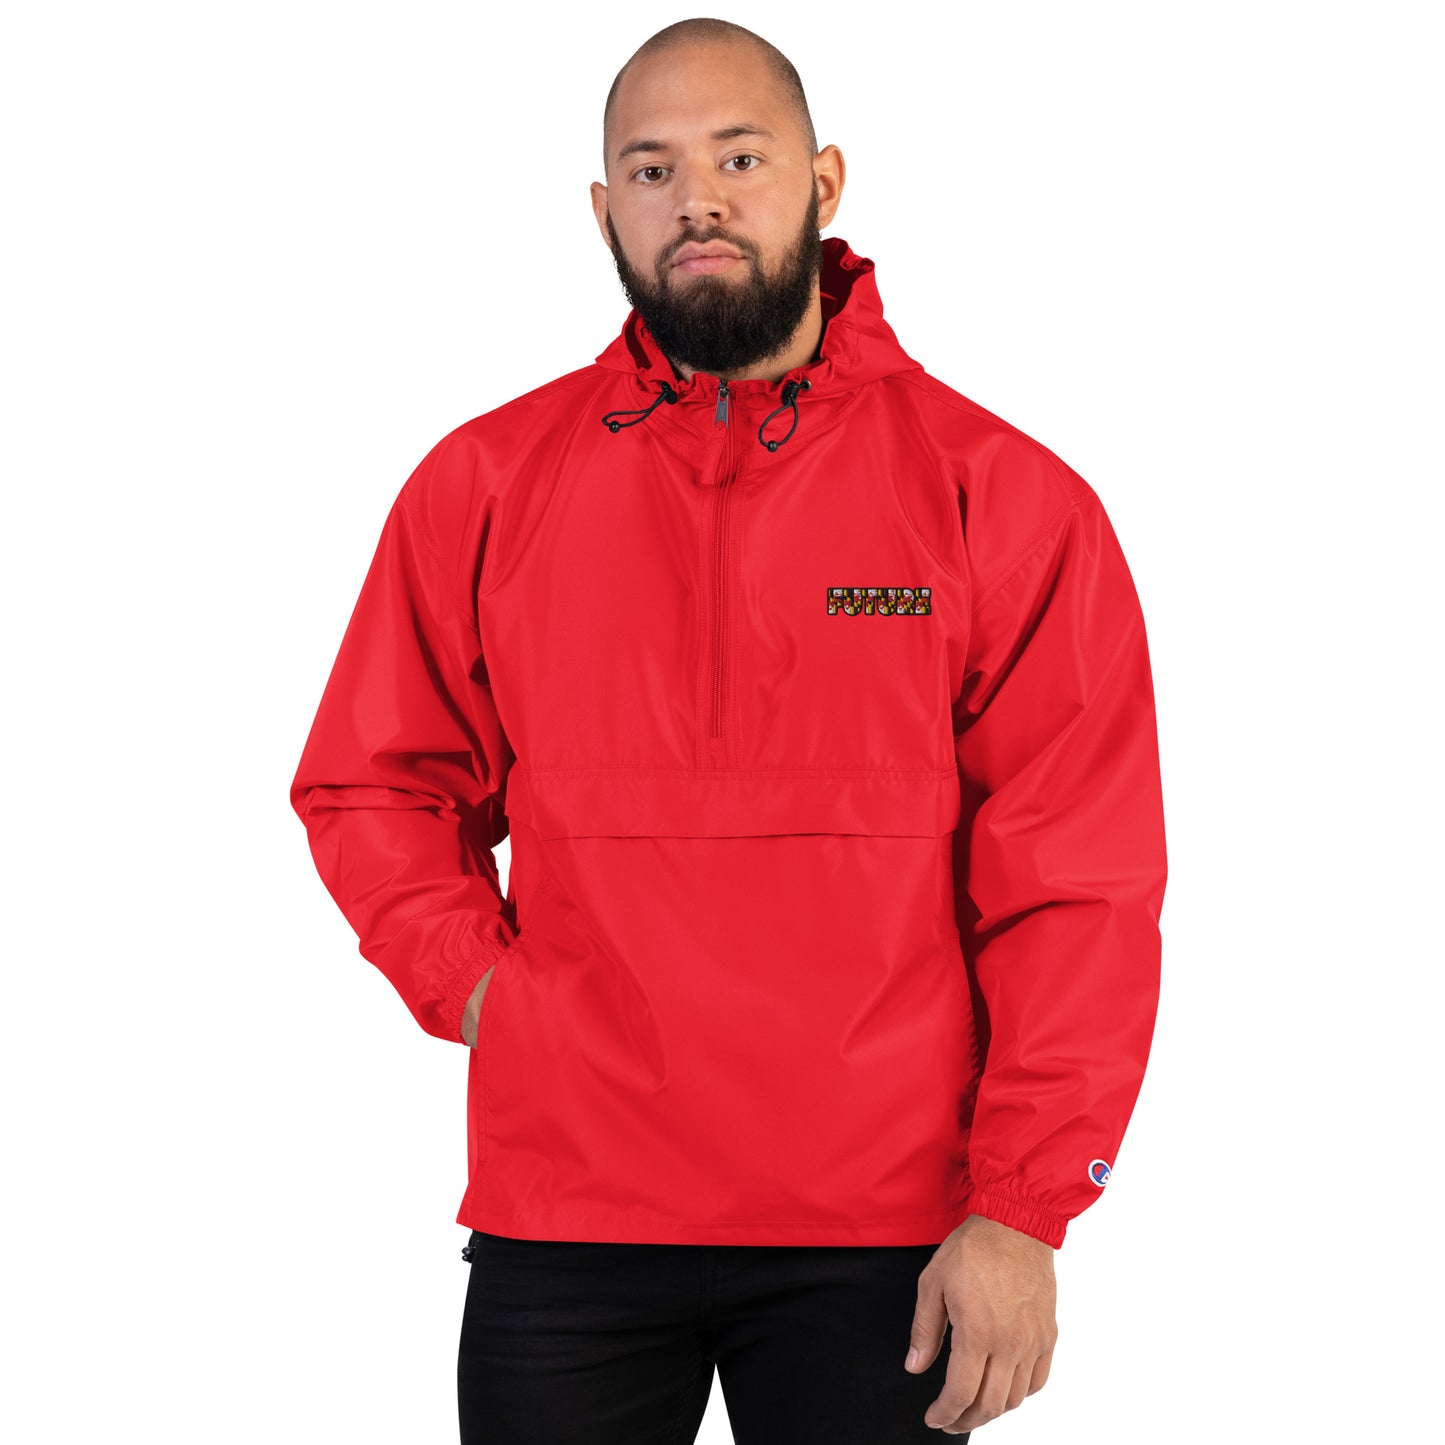 FUTURE Embroidered Champion Packable Jacket